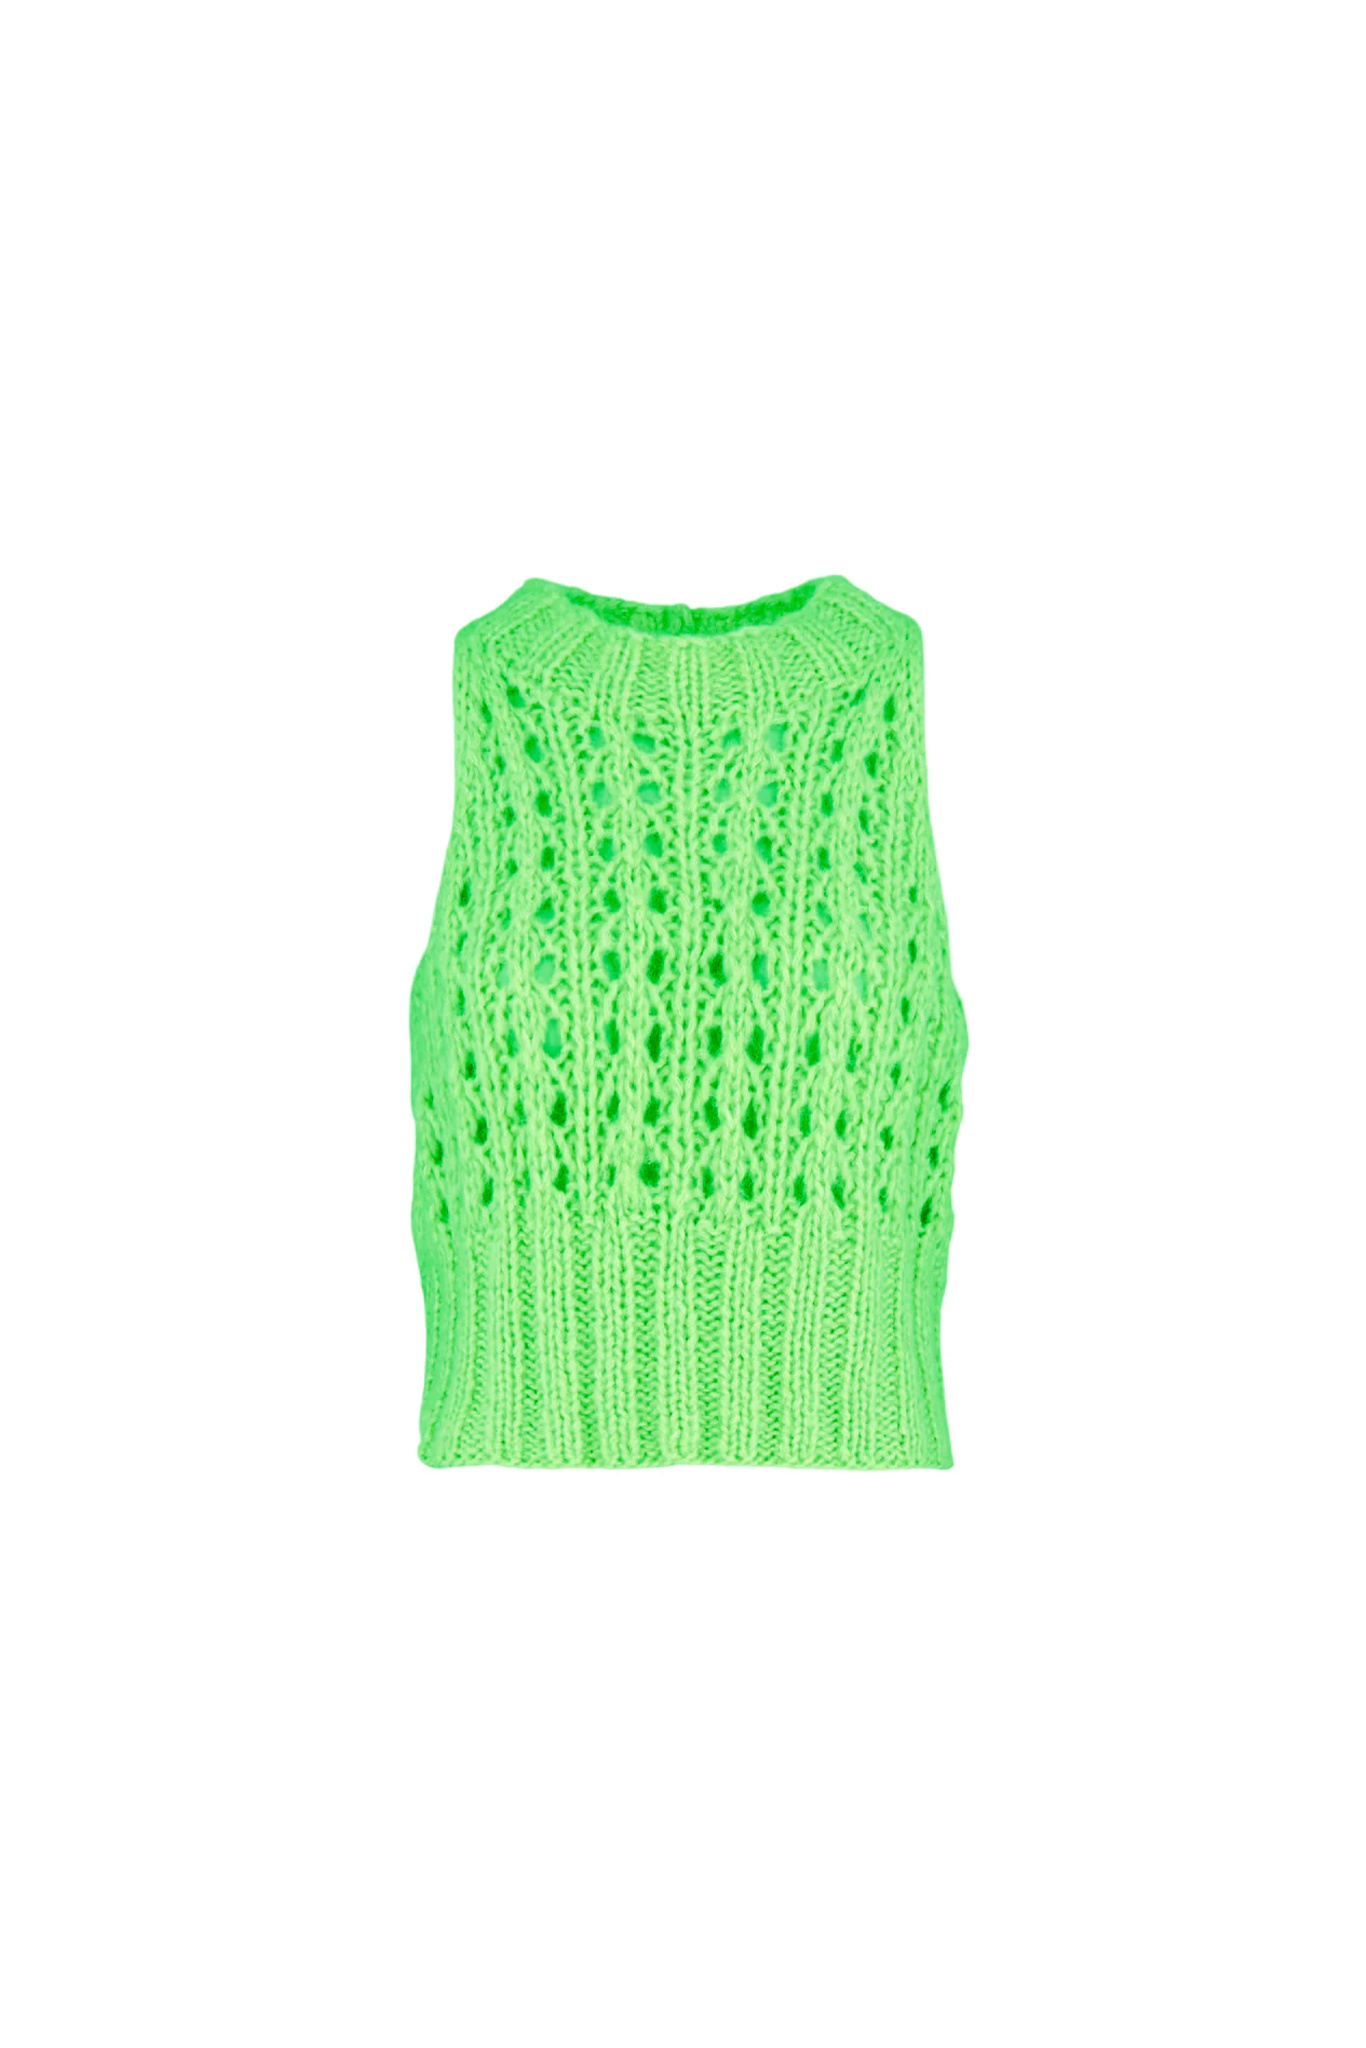 Ace Knit in Lime-6